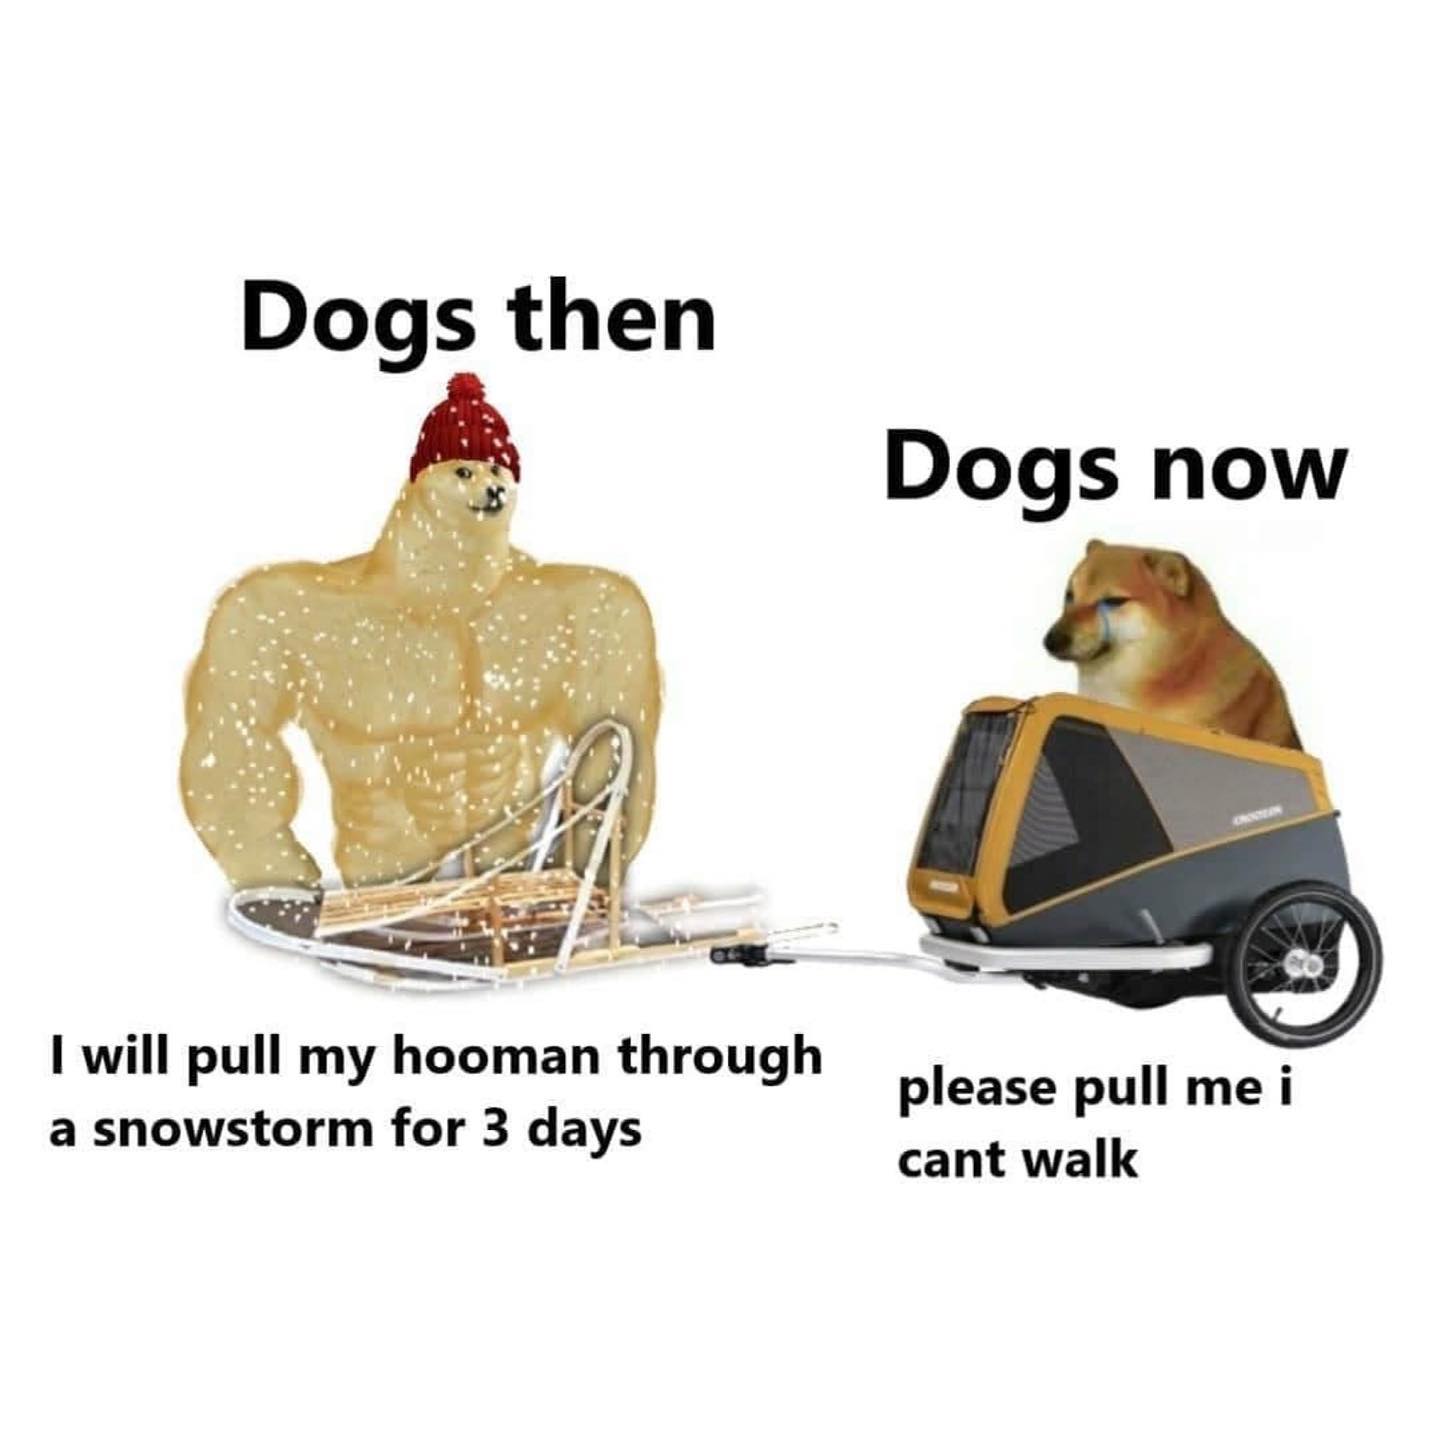 dank memes - Dog - Dogs then Dogs now I wil l pull my hooman through please pull me i a snowstorm for 3 days cant walk